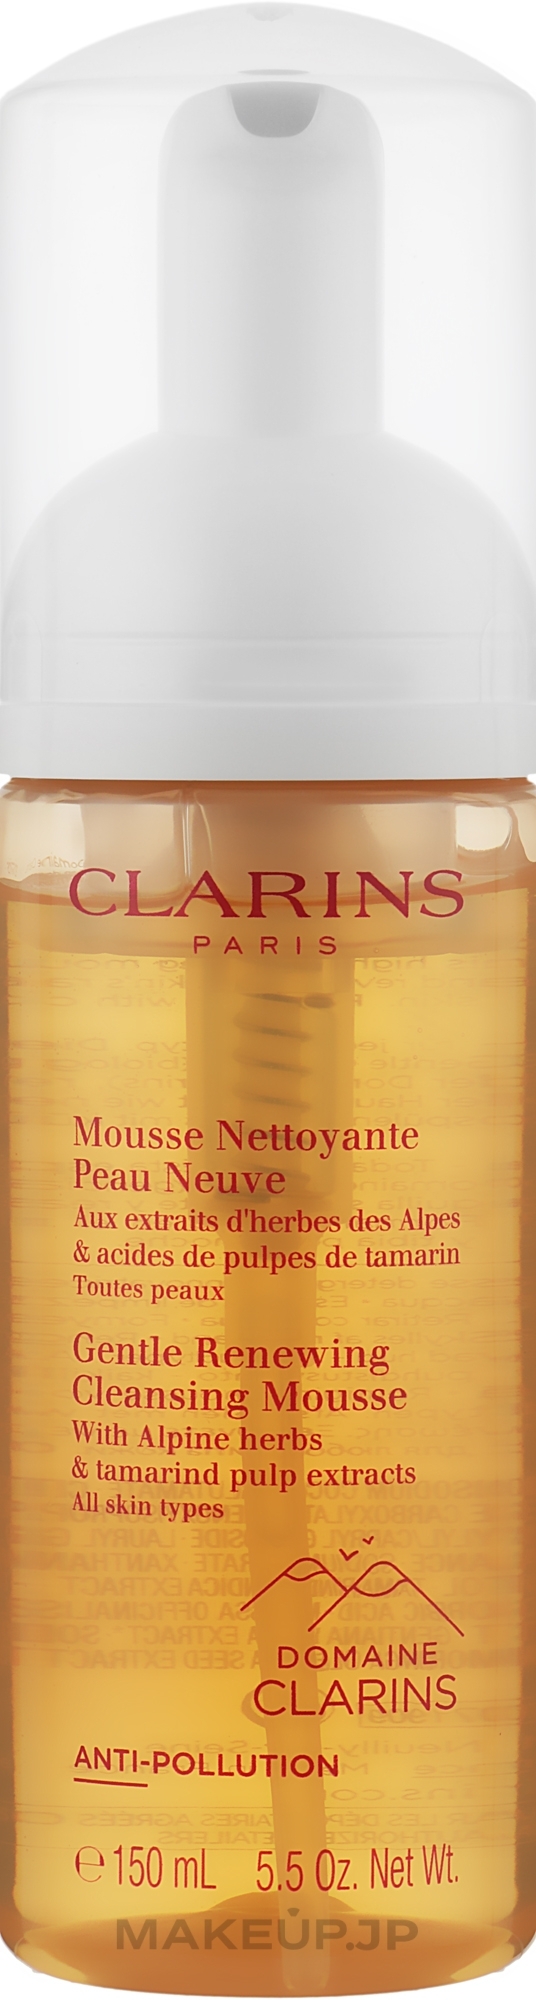 Cleansing Foaming Mousse for All Hair Types - Clarins Gentle Renewing Cleansing Mousse — photo 150 ml